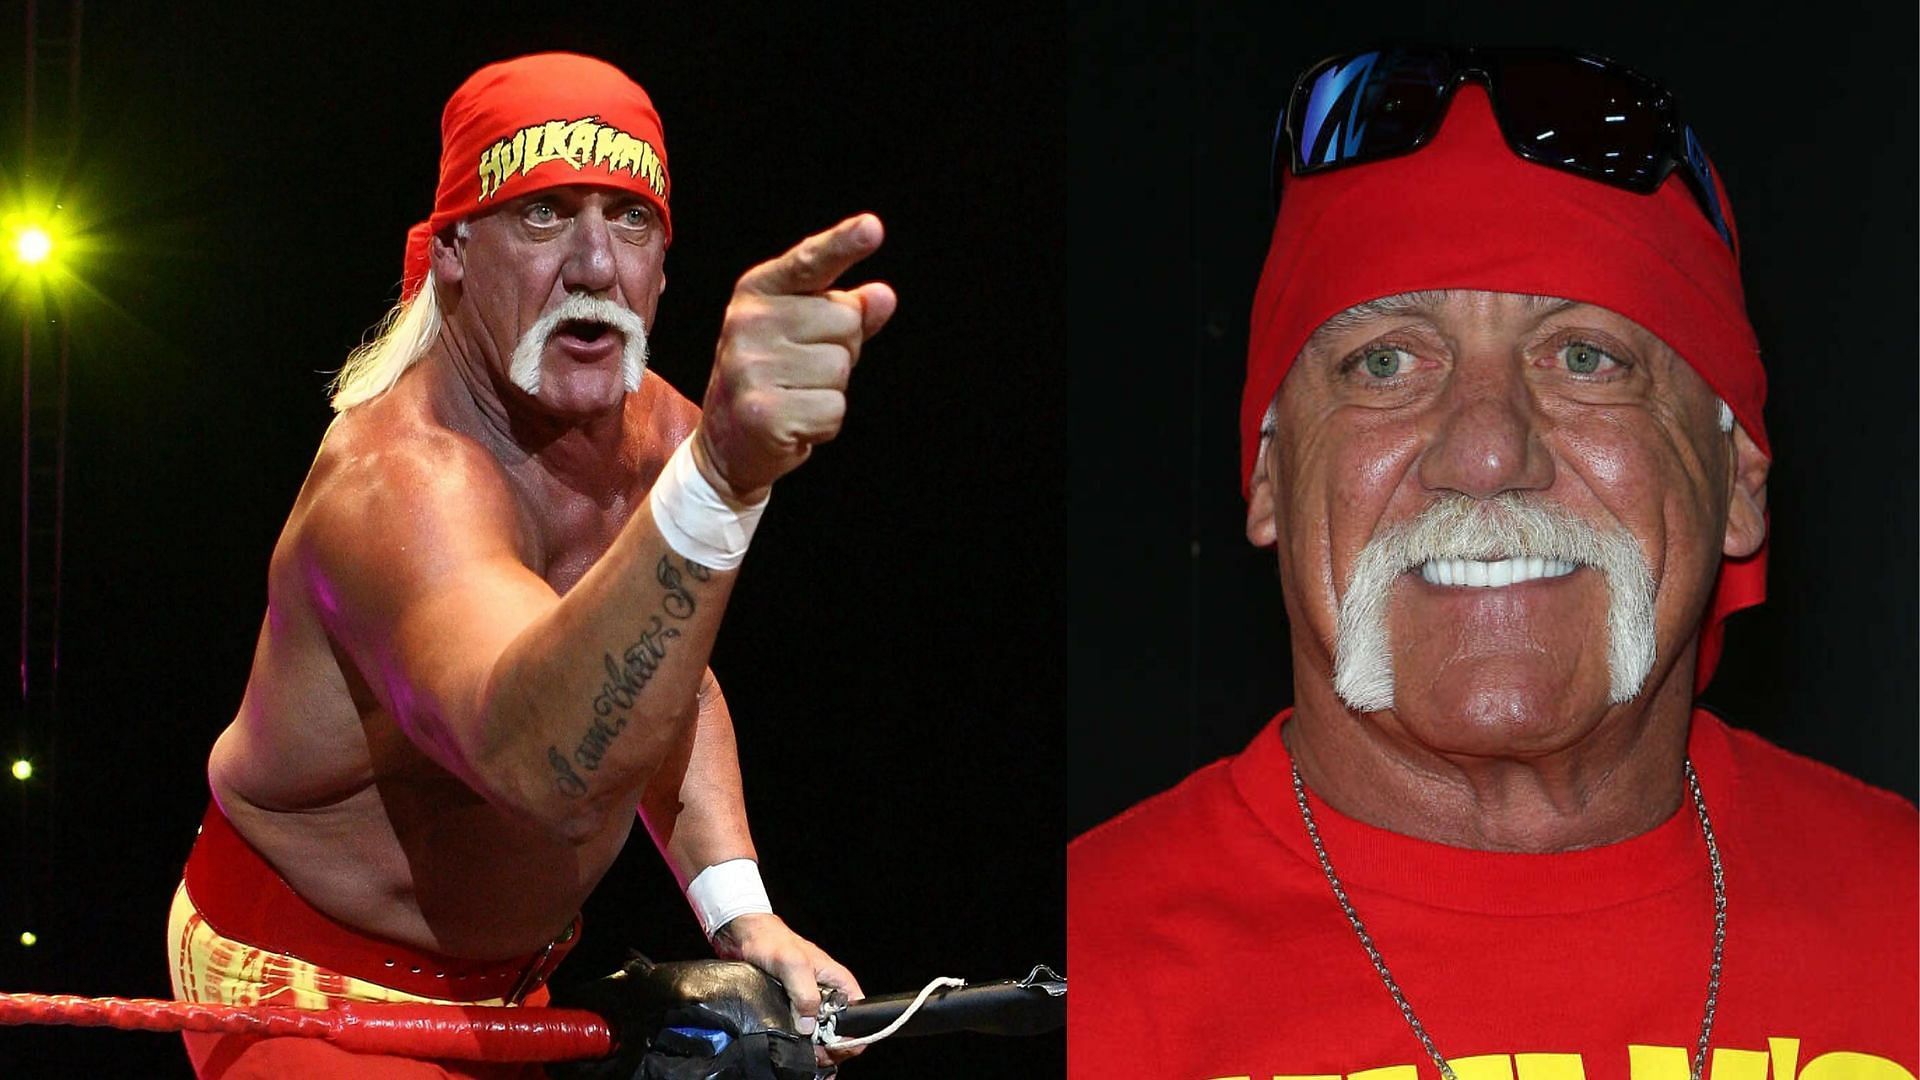 The Hulkster is an iconic figure in wrestling. 